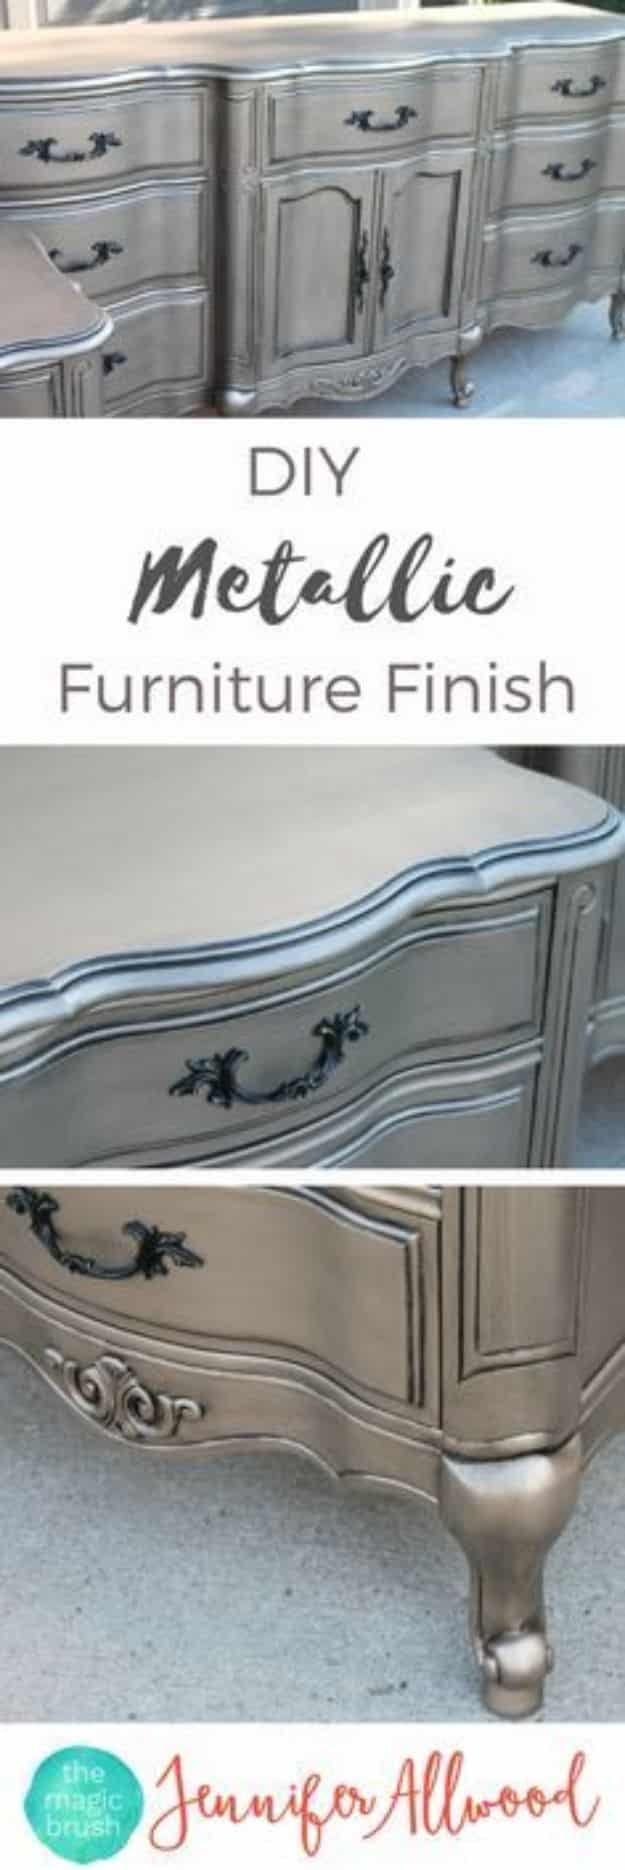 DIY Painting Hacks - DIY Metallic Furniture Finish - Easy Ways To Shortcut House Painting - Wall Prep, Painters Tape, Trim, Edging, Ceiling, Exterior Cutting In, Furniture and Crafts Paint Tips - Paint Your House Or Your Room With These Time Saving Painter Hacks and Quick Tricks http://diyjoy.com/diy-painting-hacks